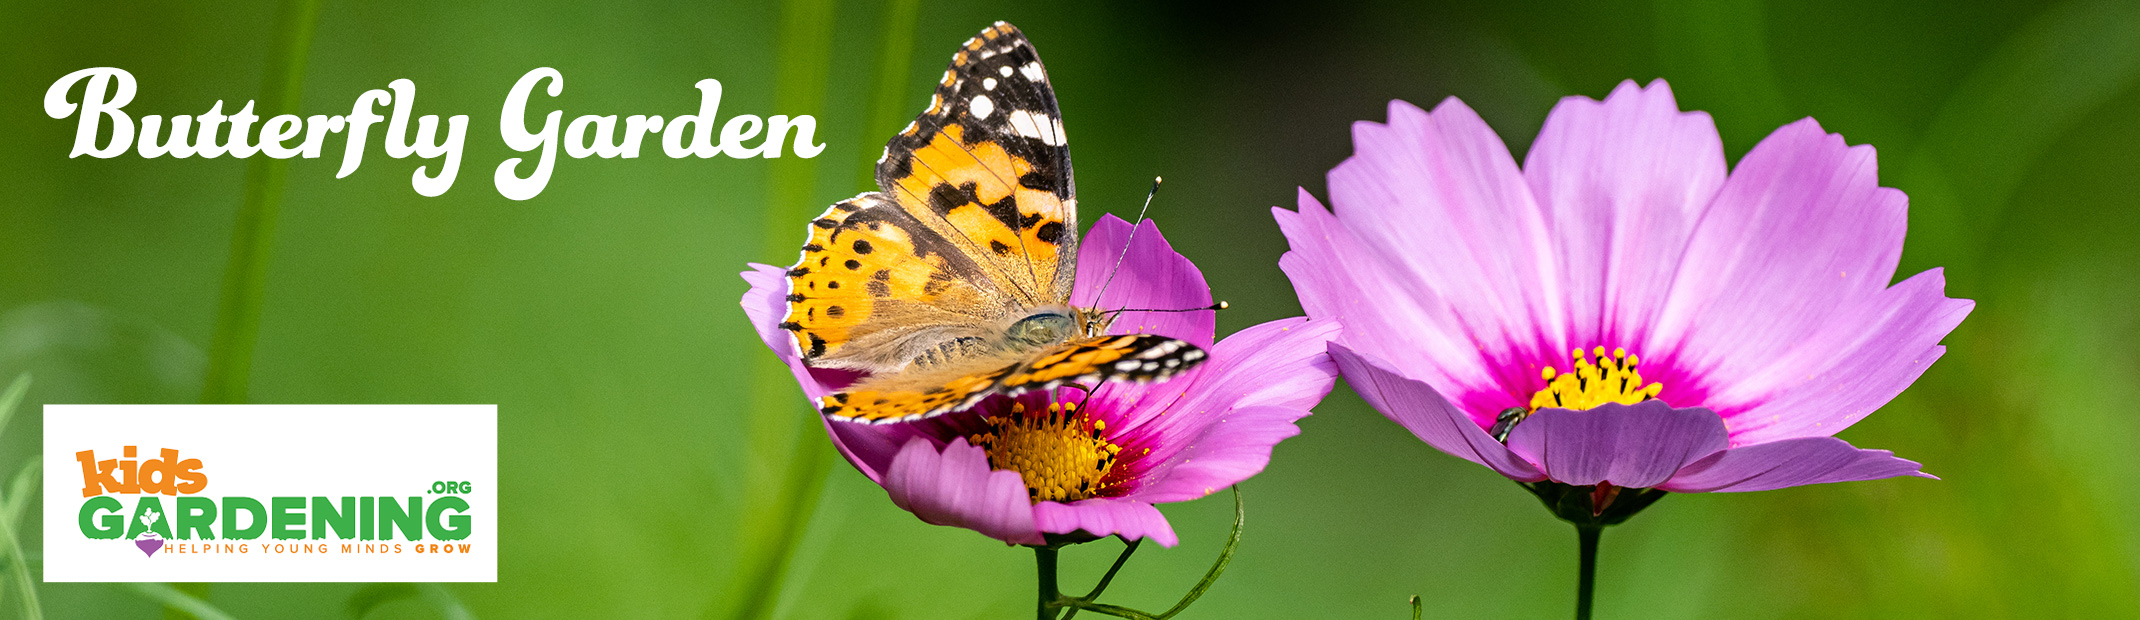 Butterfly Garden - A Painted Lady Butterfly on cosmos flowers with kidsgardening.org logo.